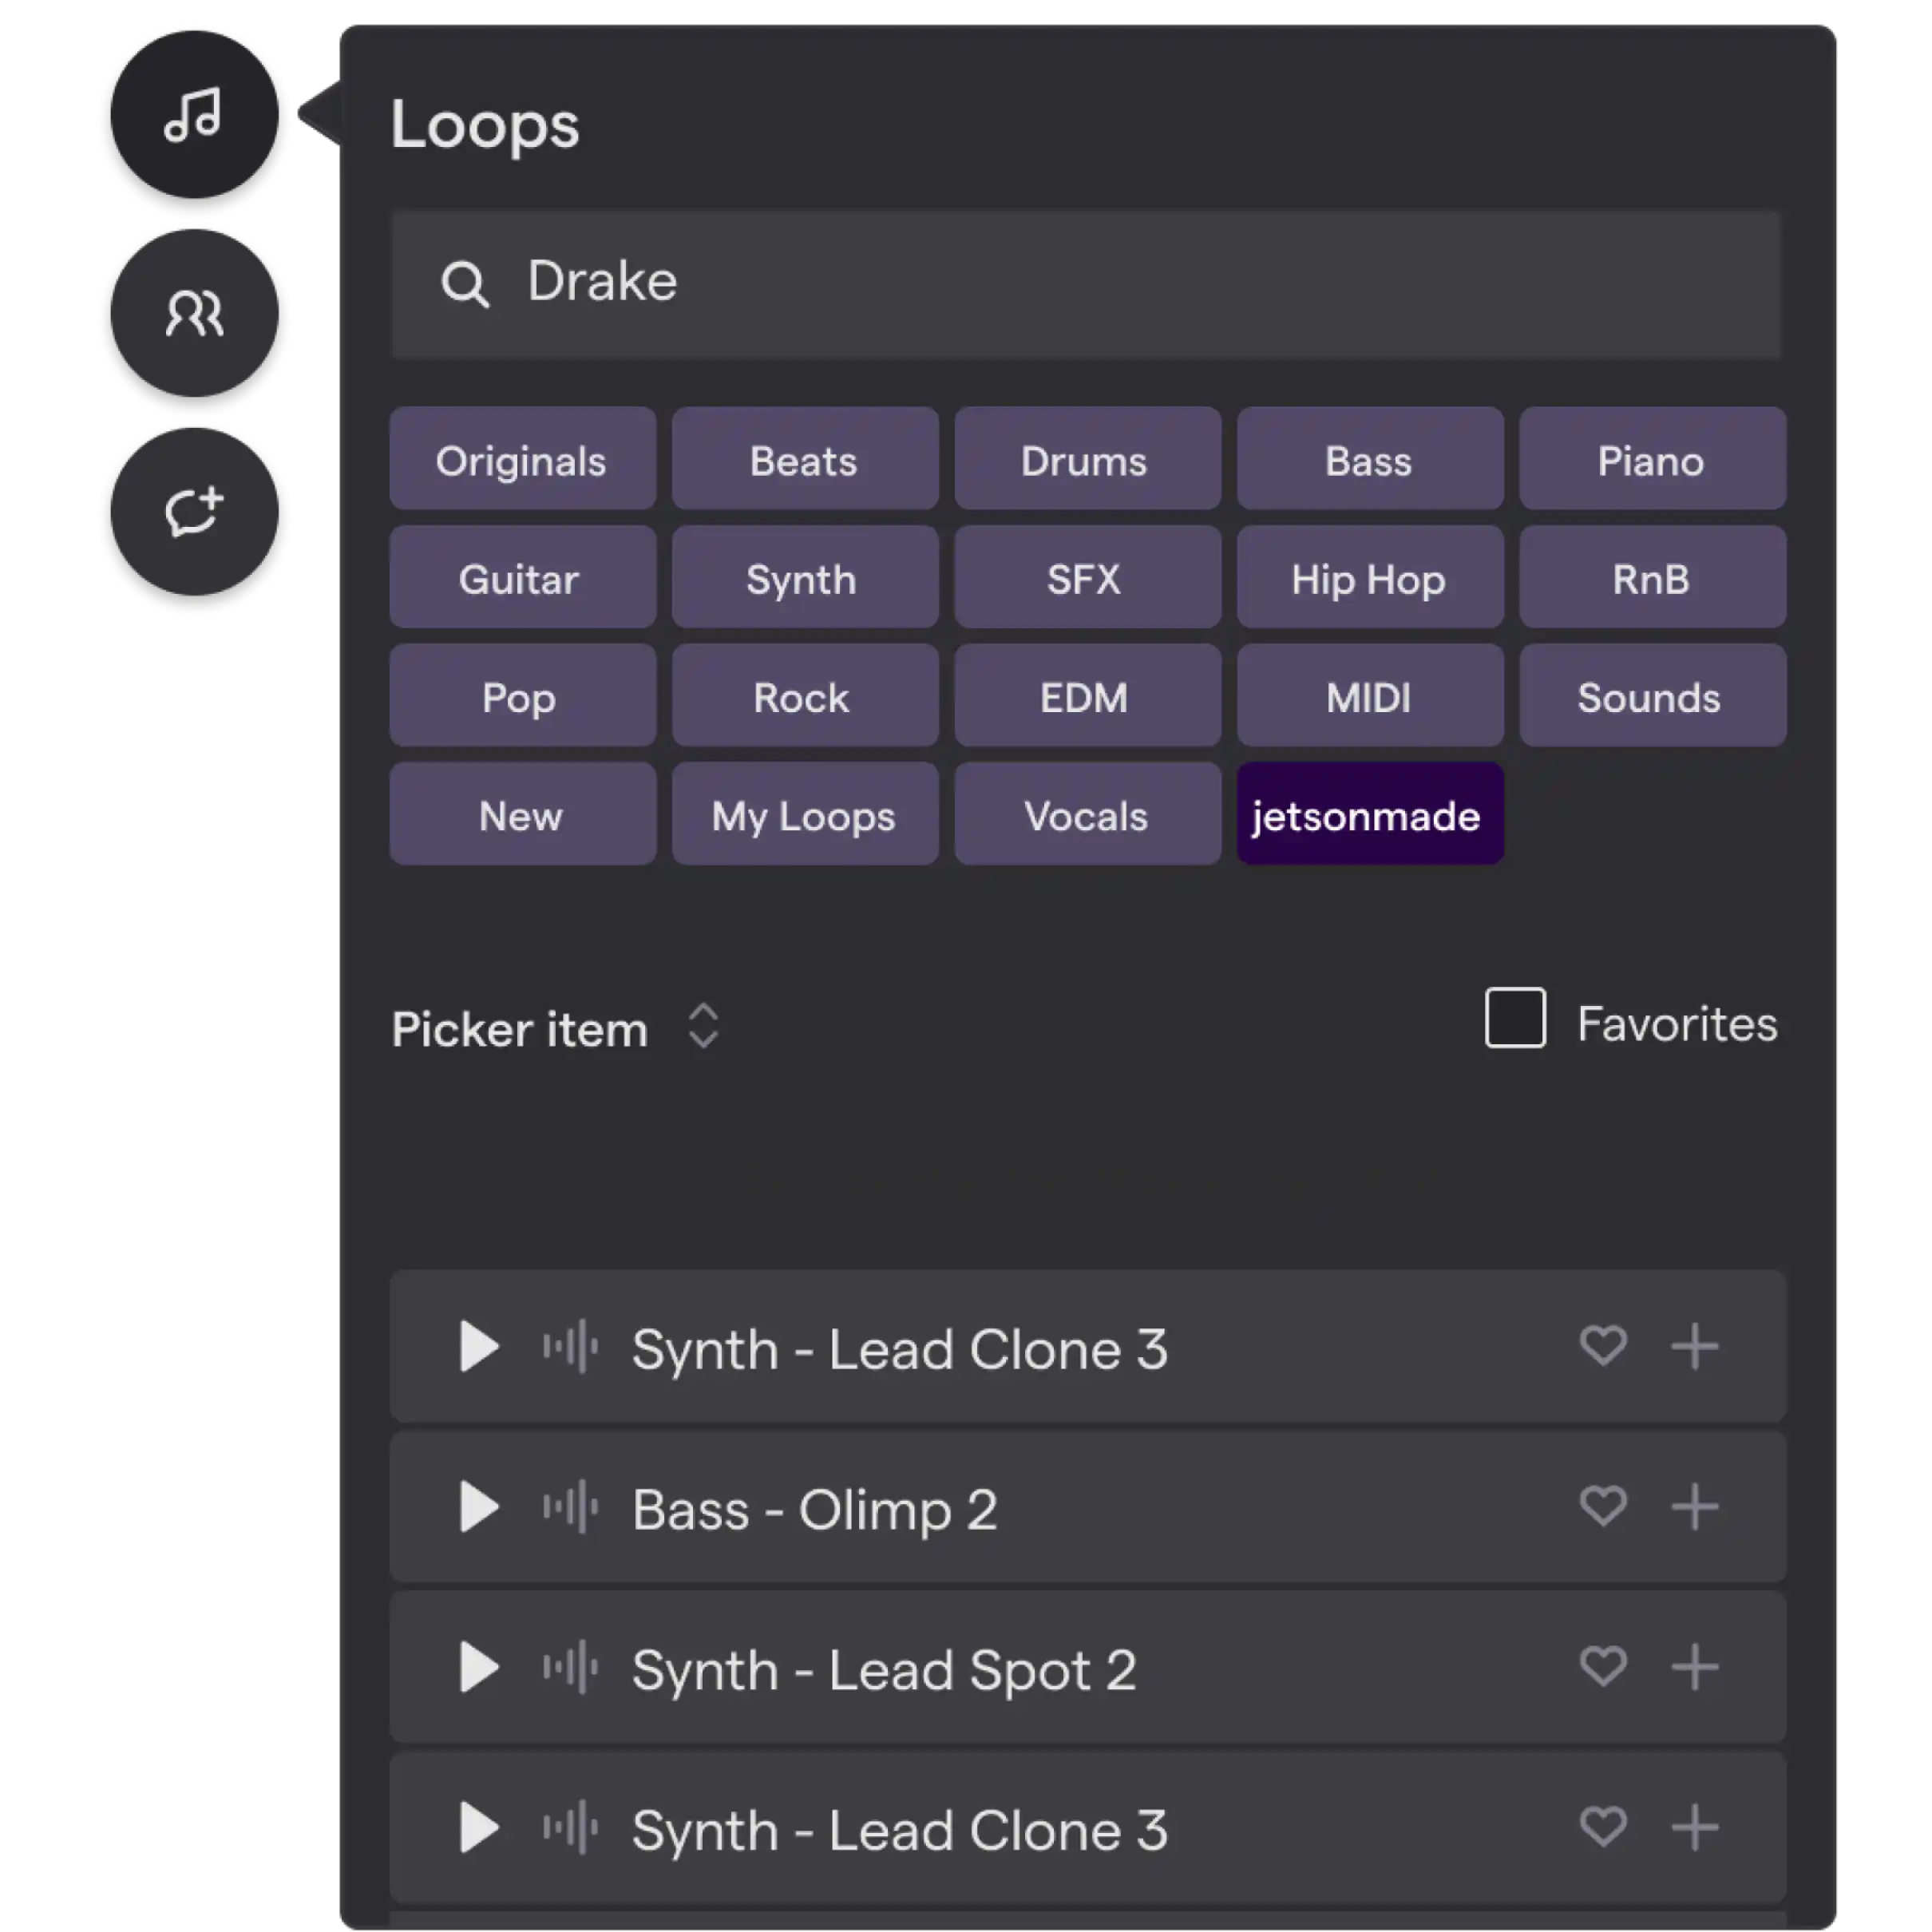 The Soundtrap loops user-interface showing loops such as Bass, Piano, Guitar, Hip Hop, RnB, EDM and more.